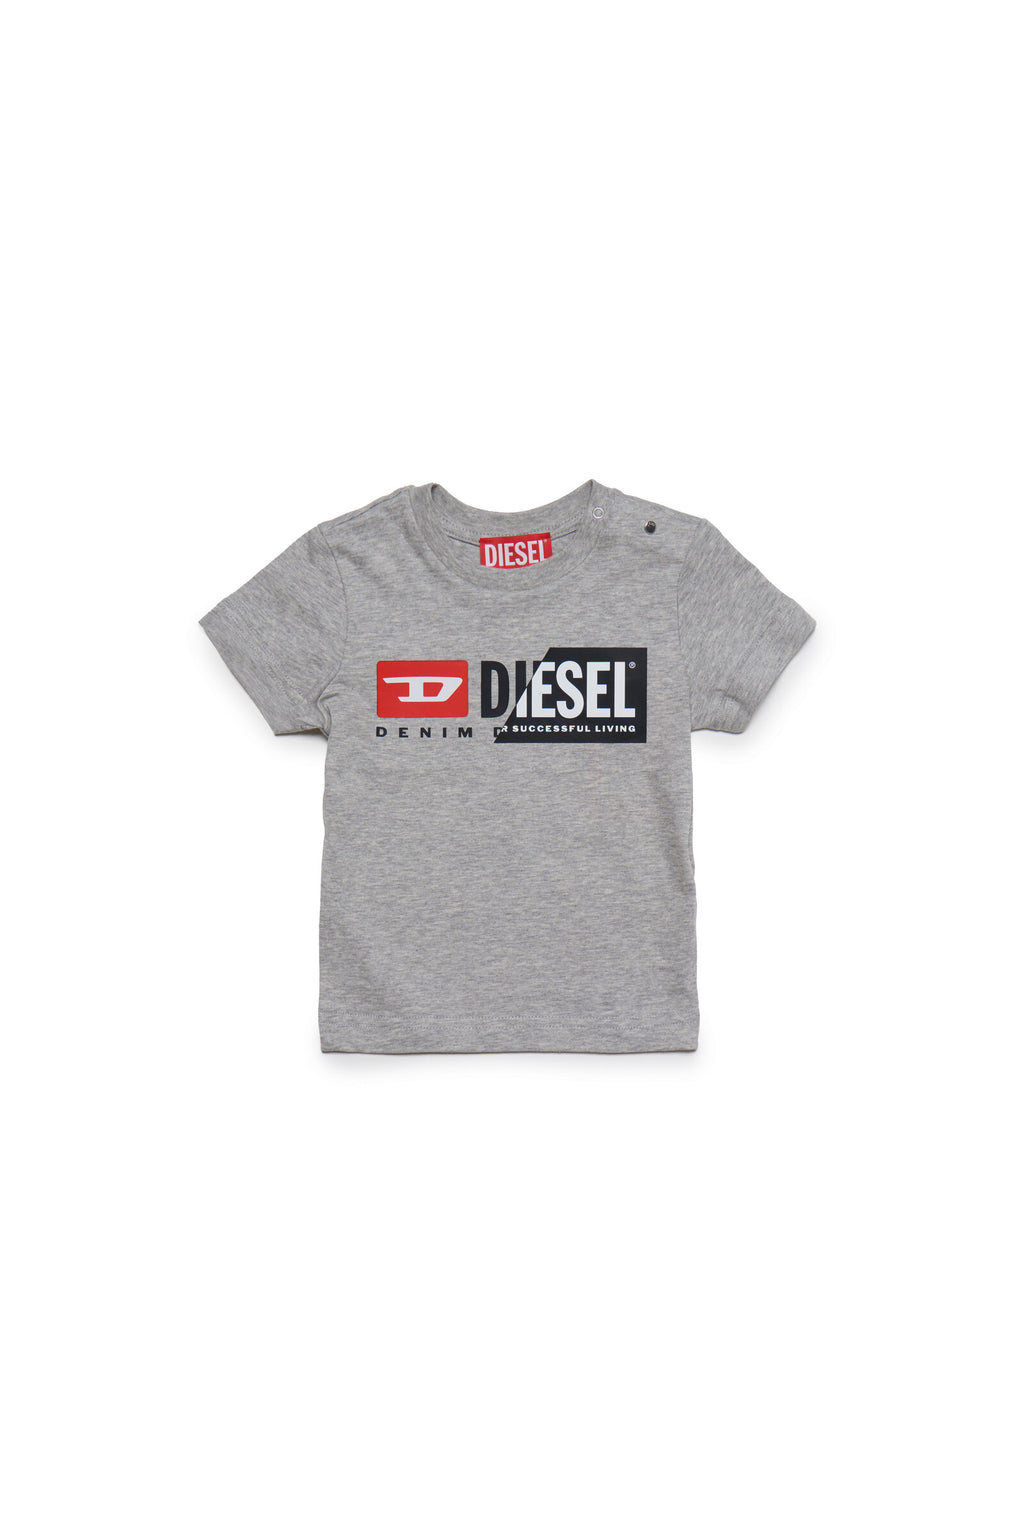 Gray t-shirt with Diesel double logo and snap button closure